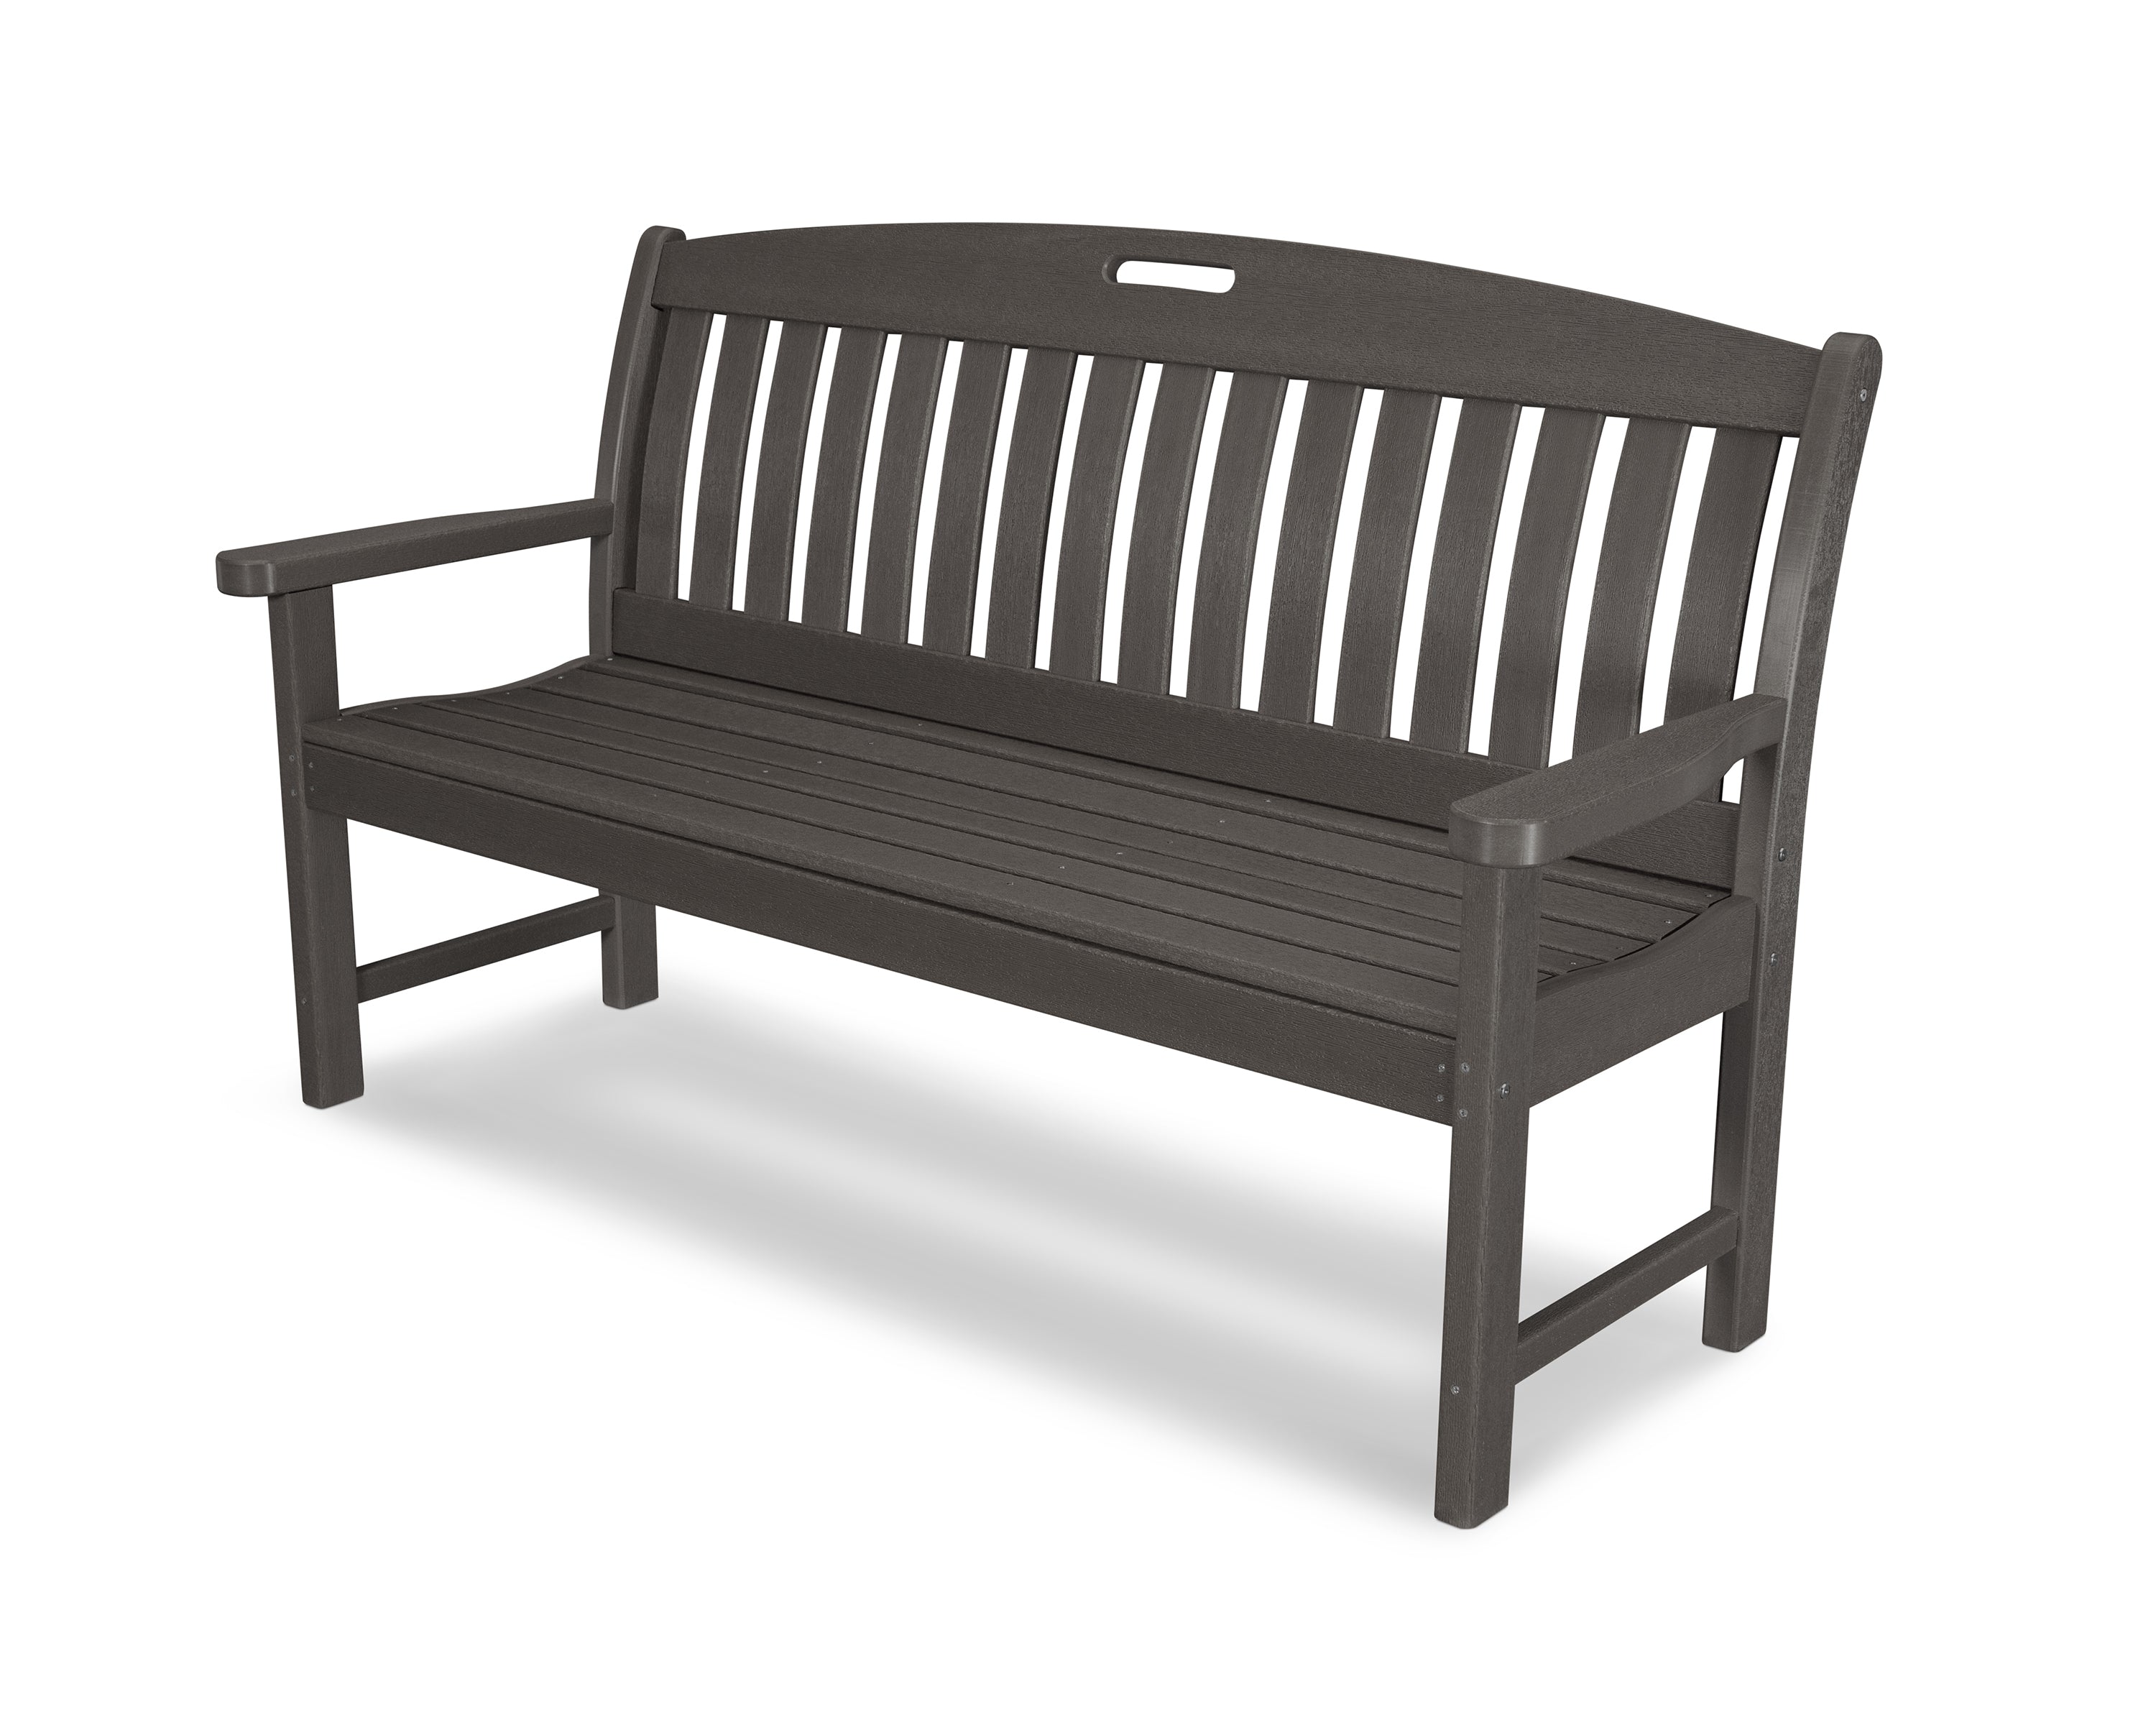 POLYWOOD® Nautical 60" Bench in Vintage Coffee